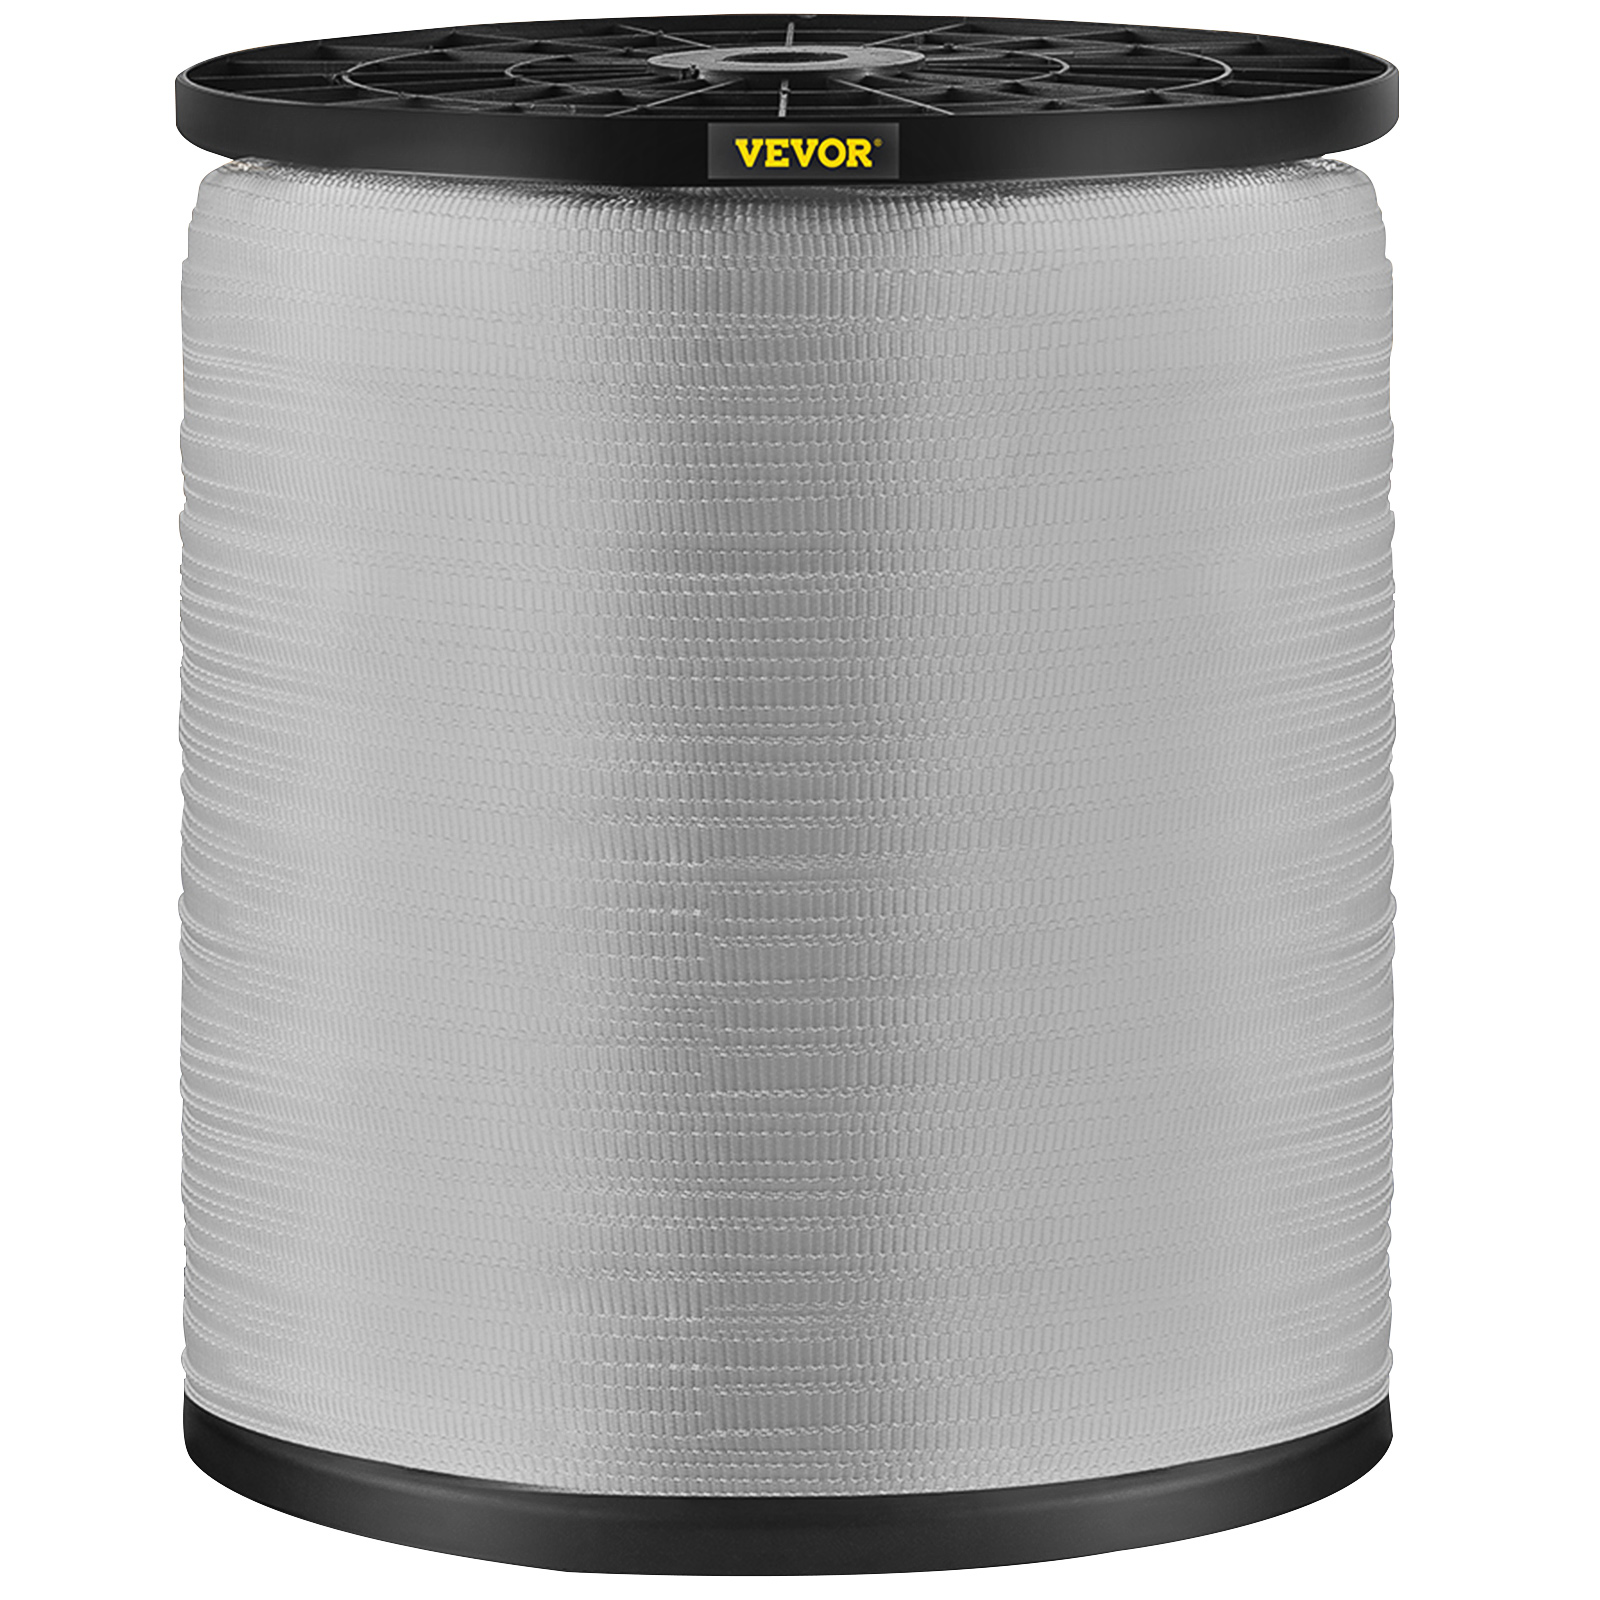 Vevor 5/8" X 630' Polyester Pull Tape Flat Rope 1800 Lbs Tensile Capacity от Vevor Many GEOs